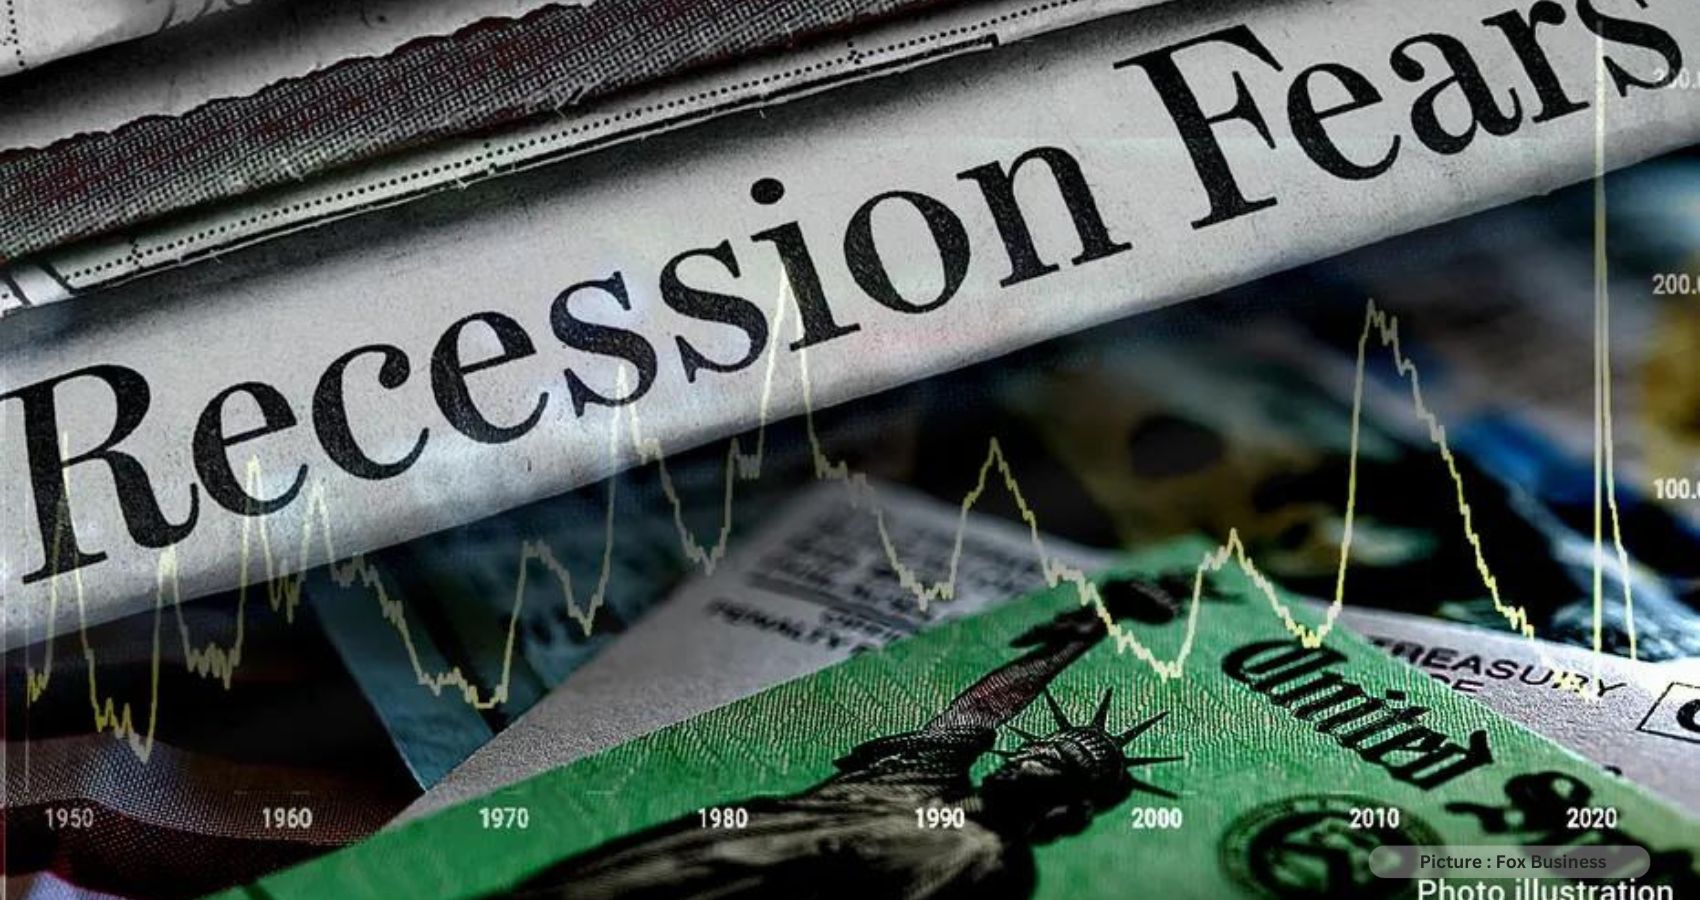 US May See Deep Recession, Could Impact India’s Markets, Exports: Economist